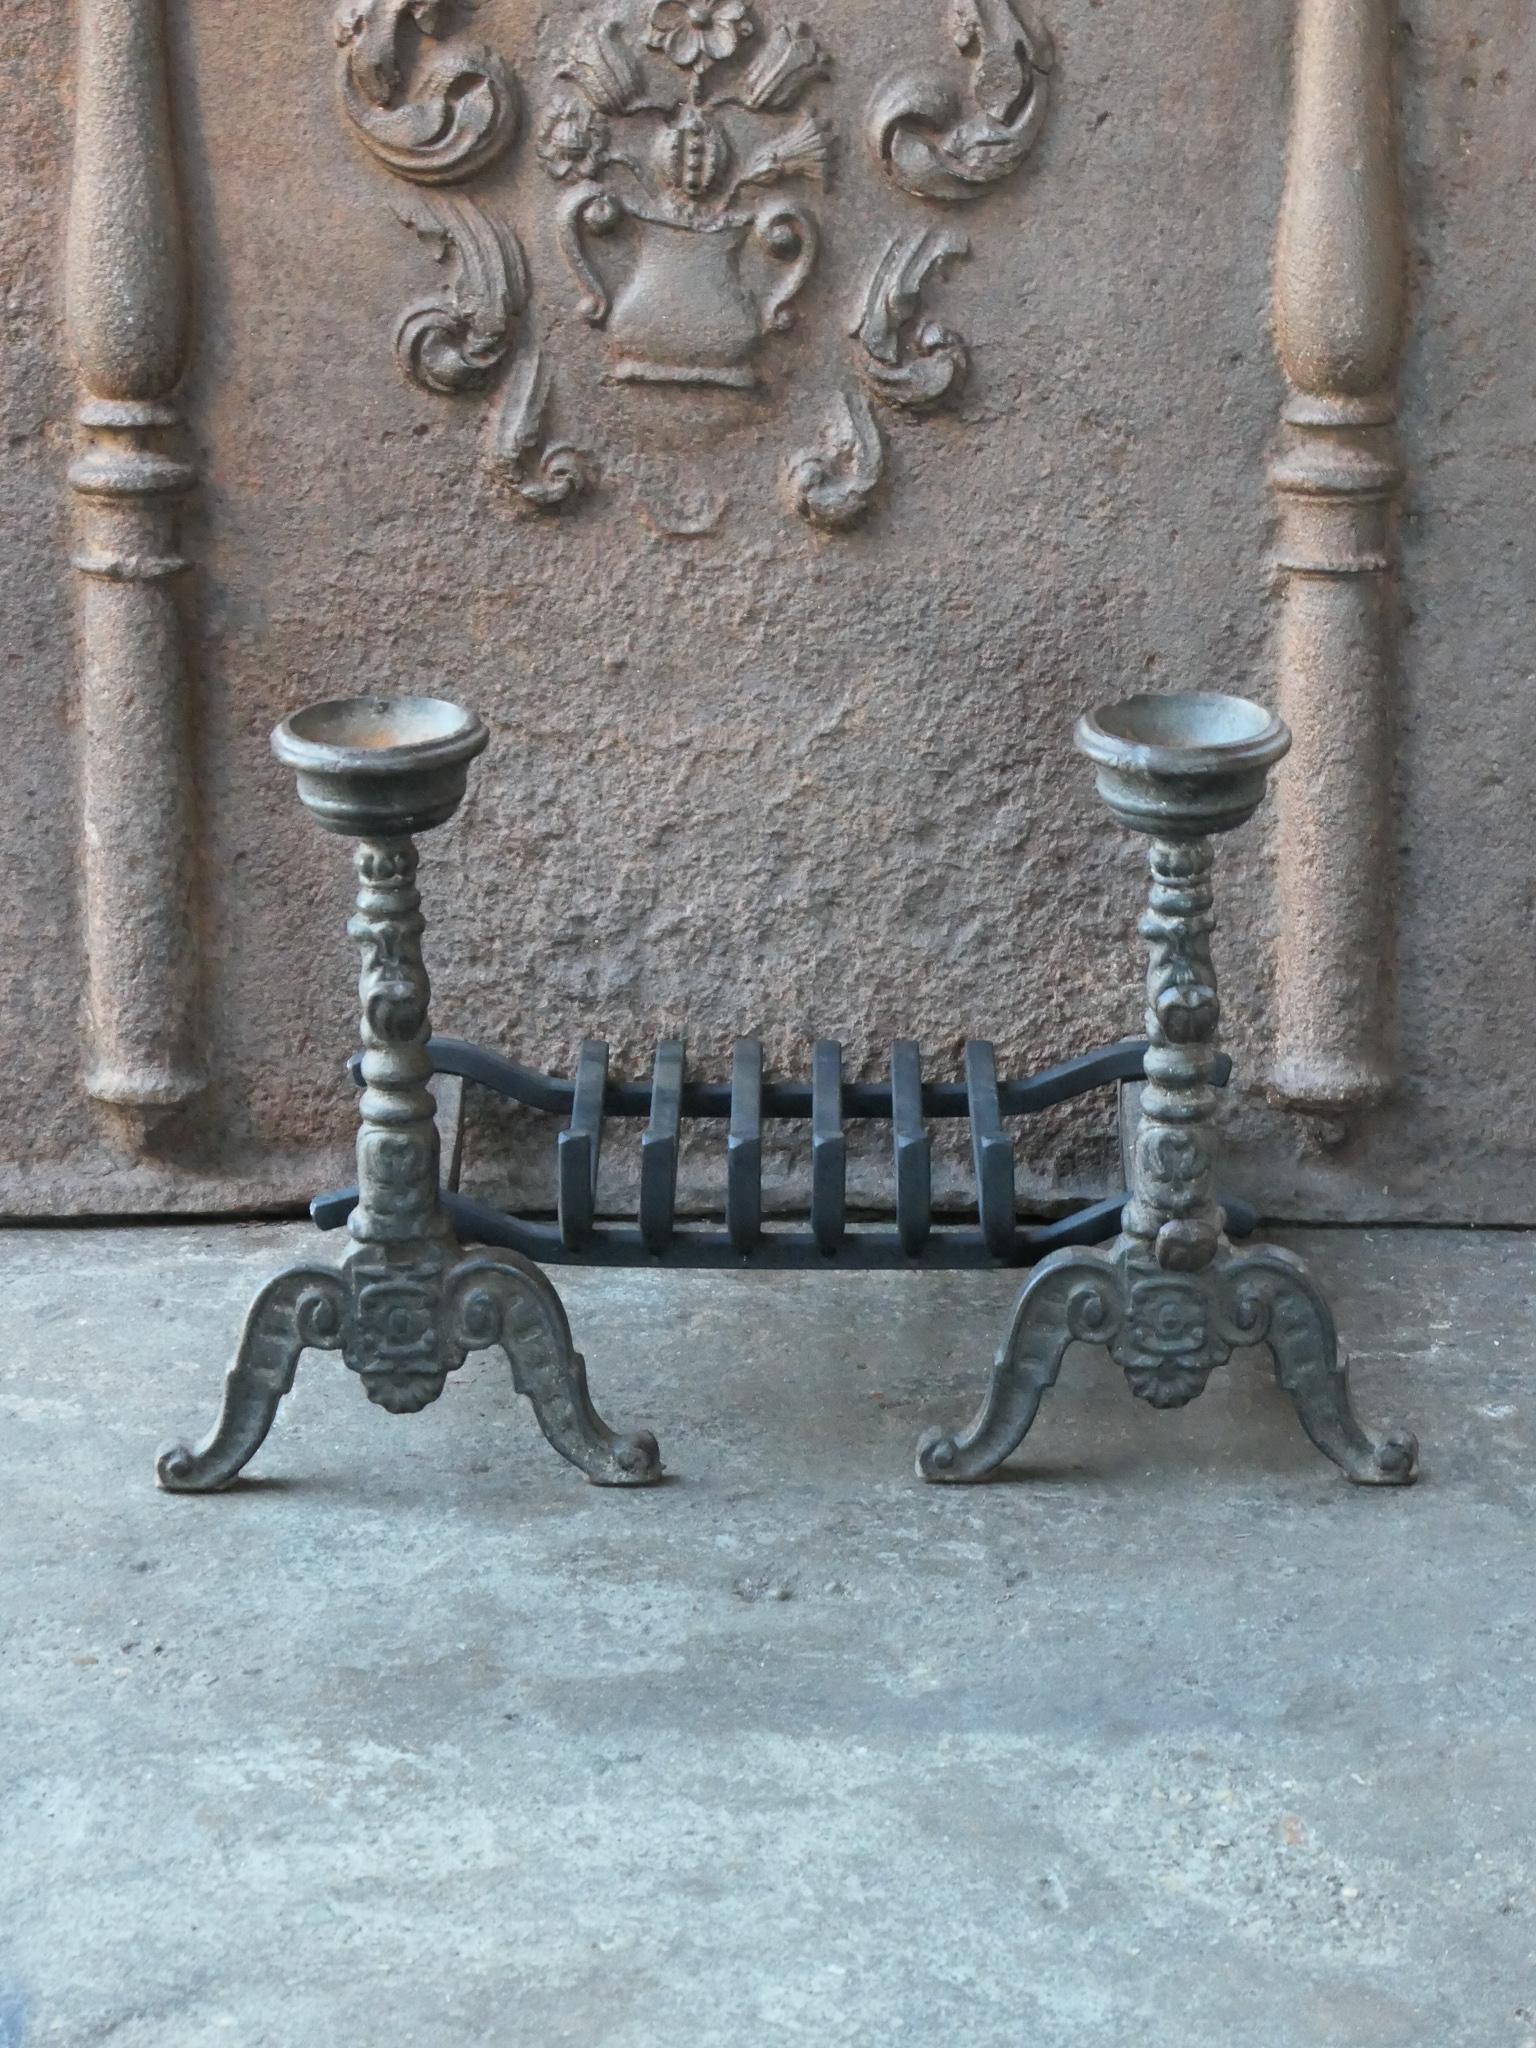 Late 19th or early 20th century French Napoleon III fireplace basket, fire basket made of wrought iron and cast iron. The basket is in a good condition and is fully functional.